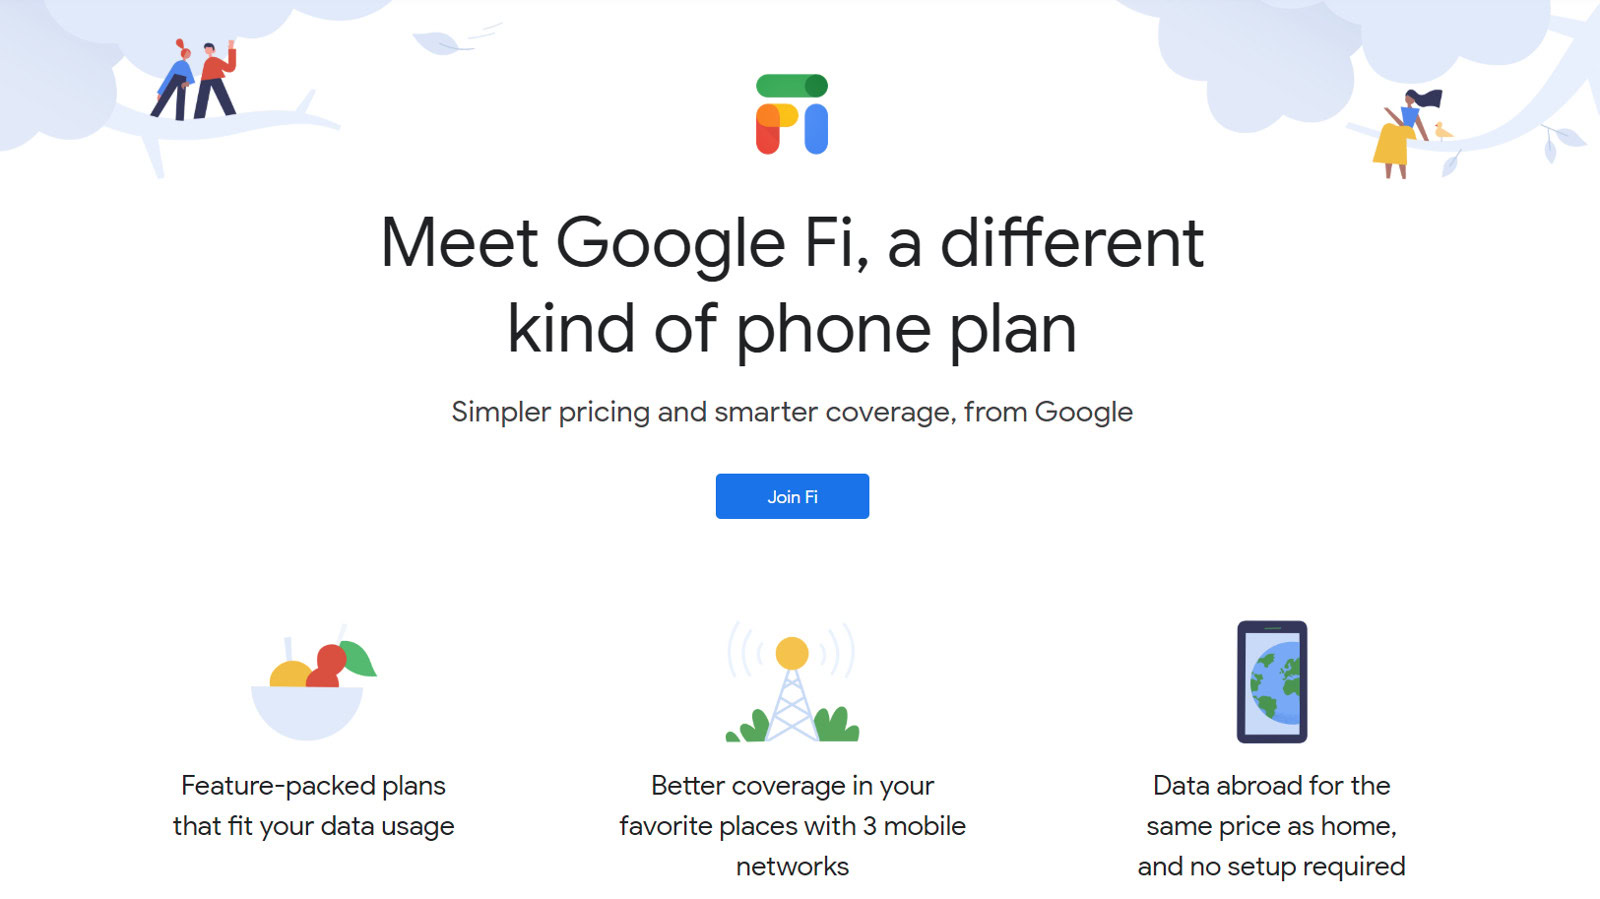 Google Fi Airport Vending Machines Will Solve Your Roaming Woes